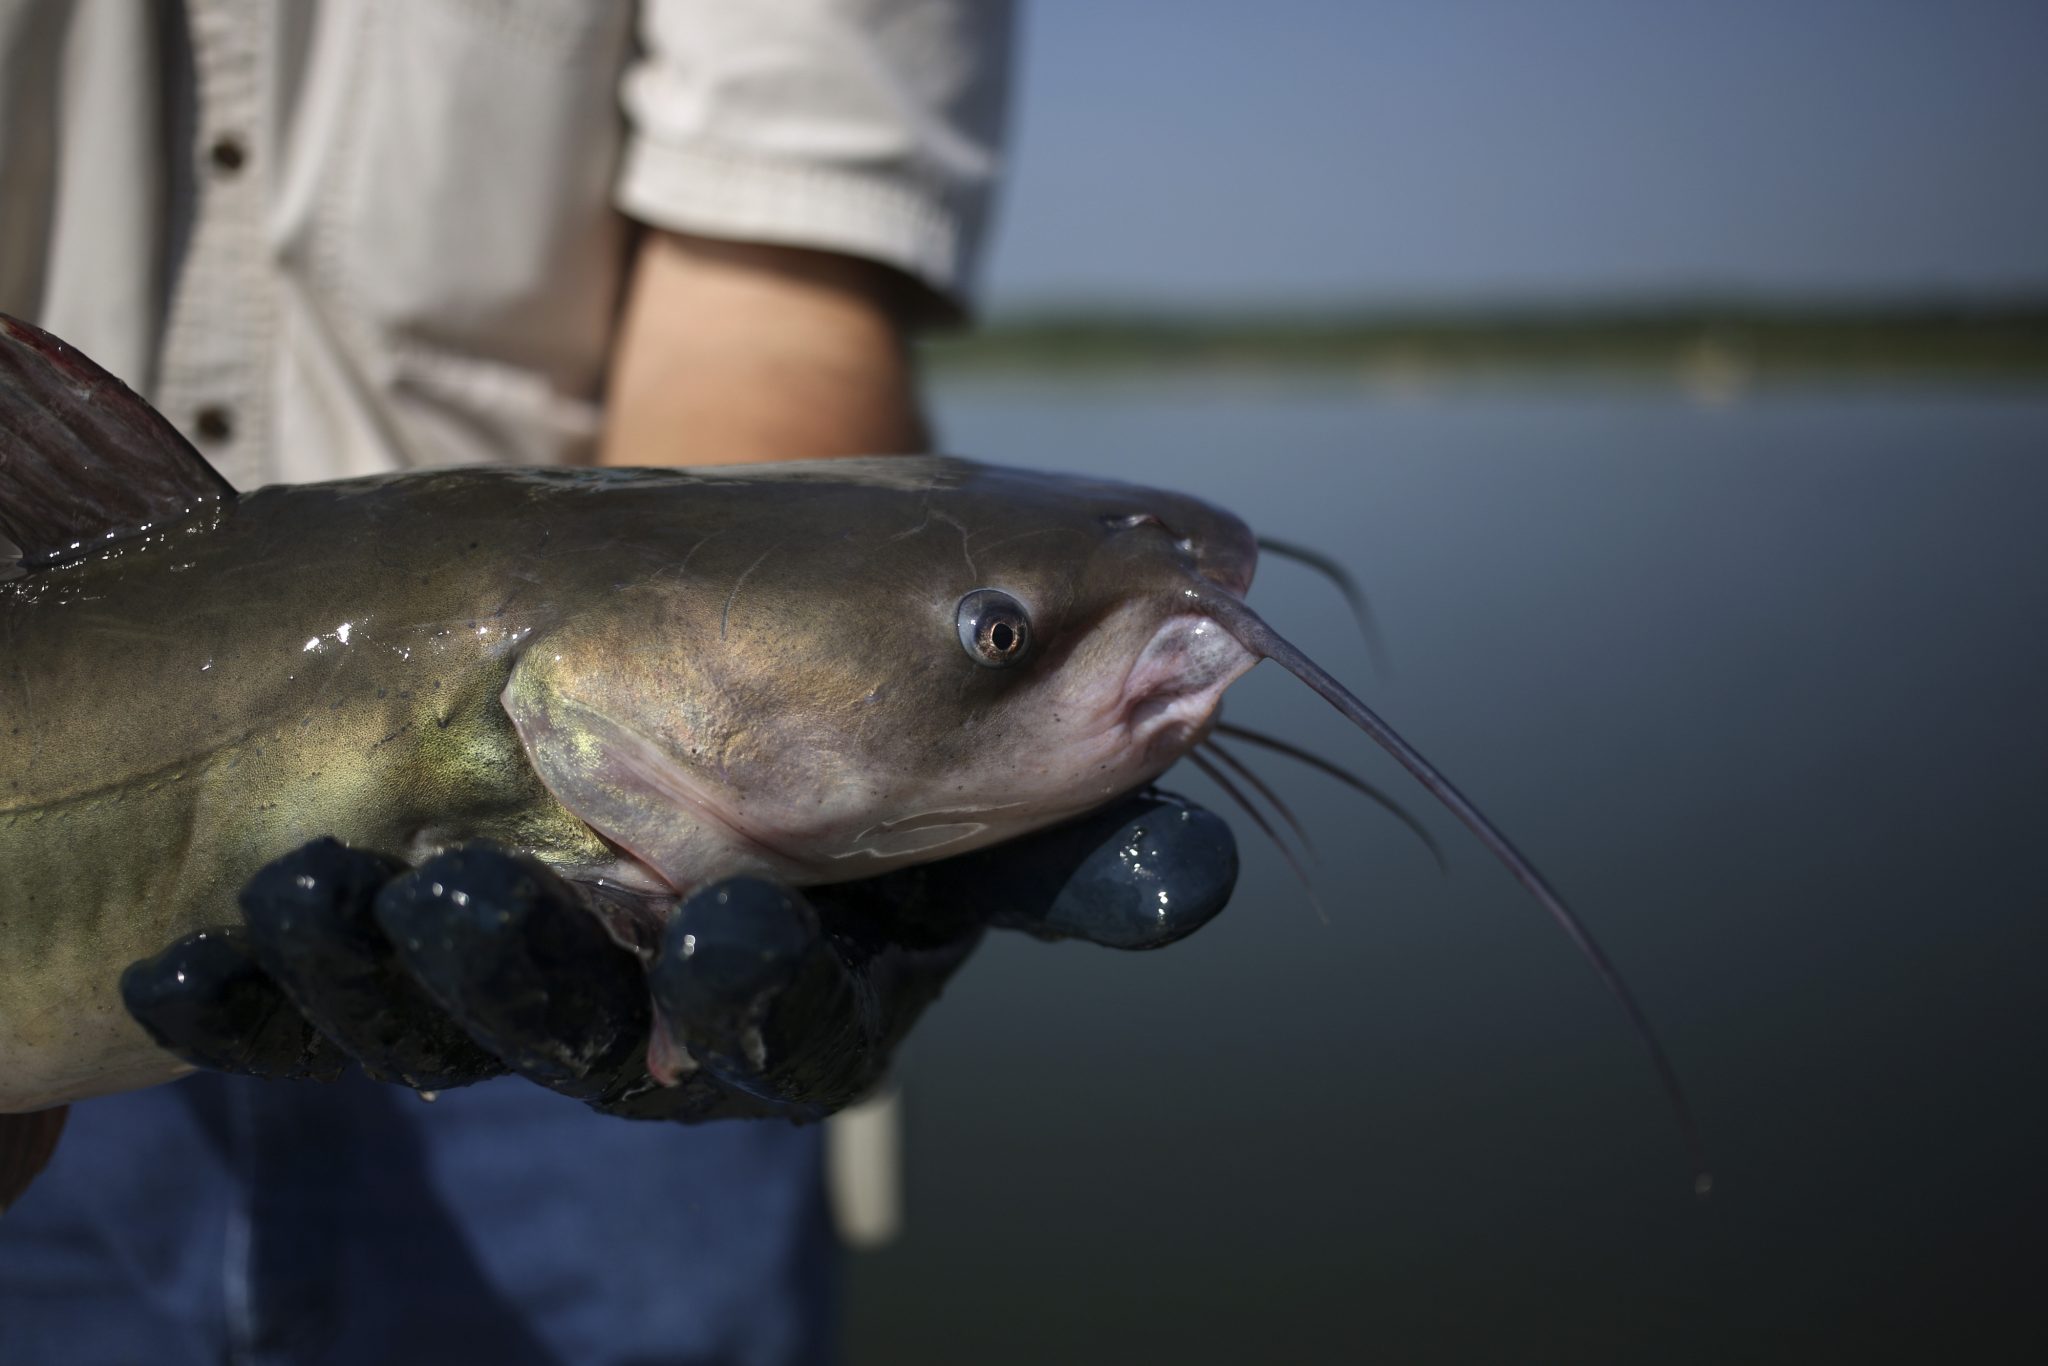 A fisherman displays a catfish that was fished out of a pond on an aquaculture farm in Alabama, U.S. Photographer: Luke Sharrett/Bloomberg